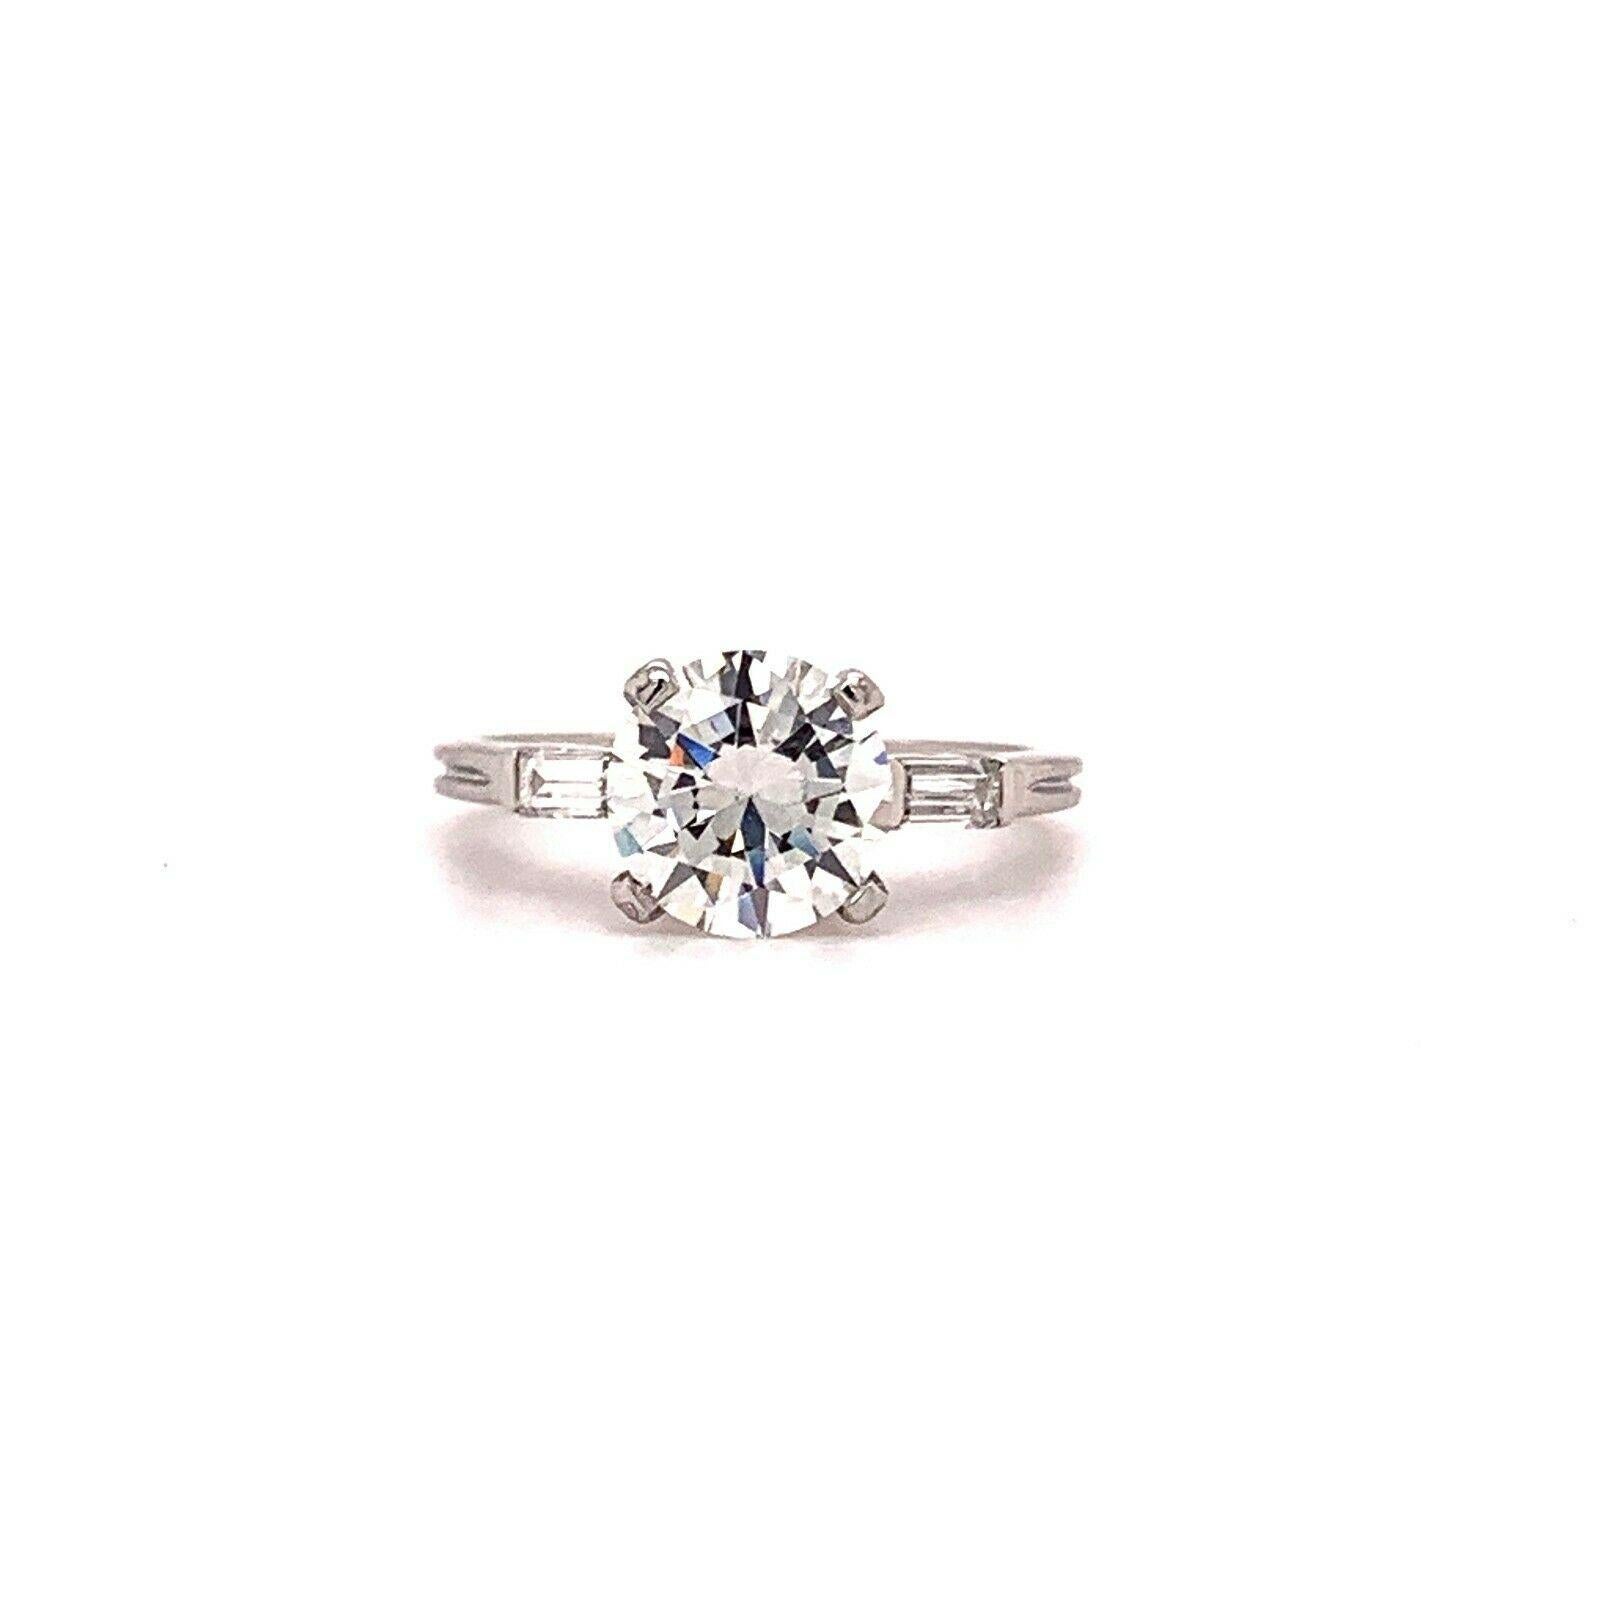 Vintage Tiffany & Co. Round Diamond 1.72 Carat Engagement Ring GIA H VS2 For Sale 6